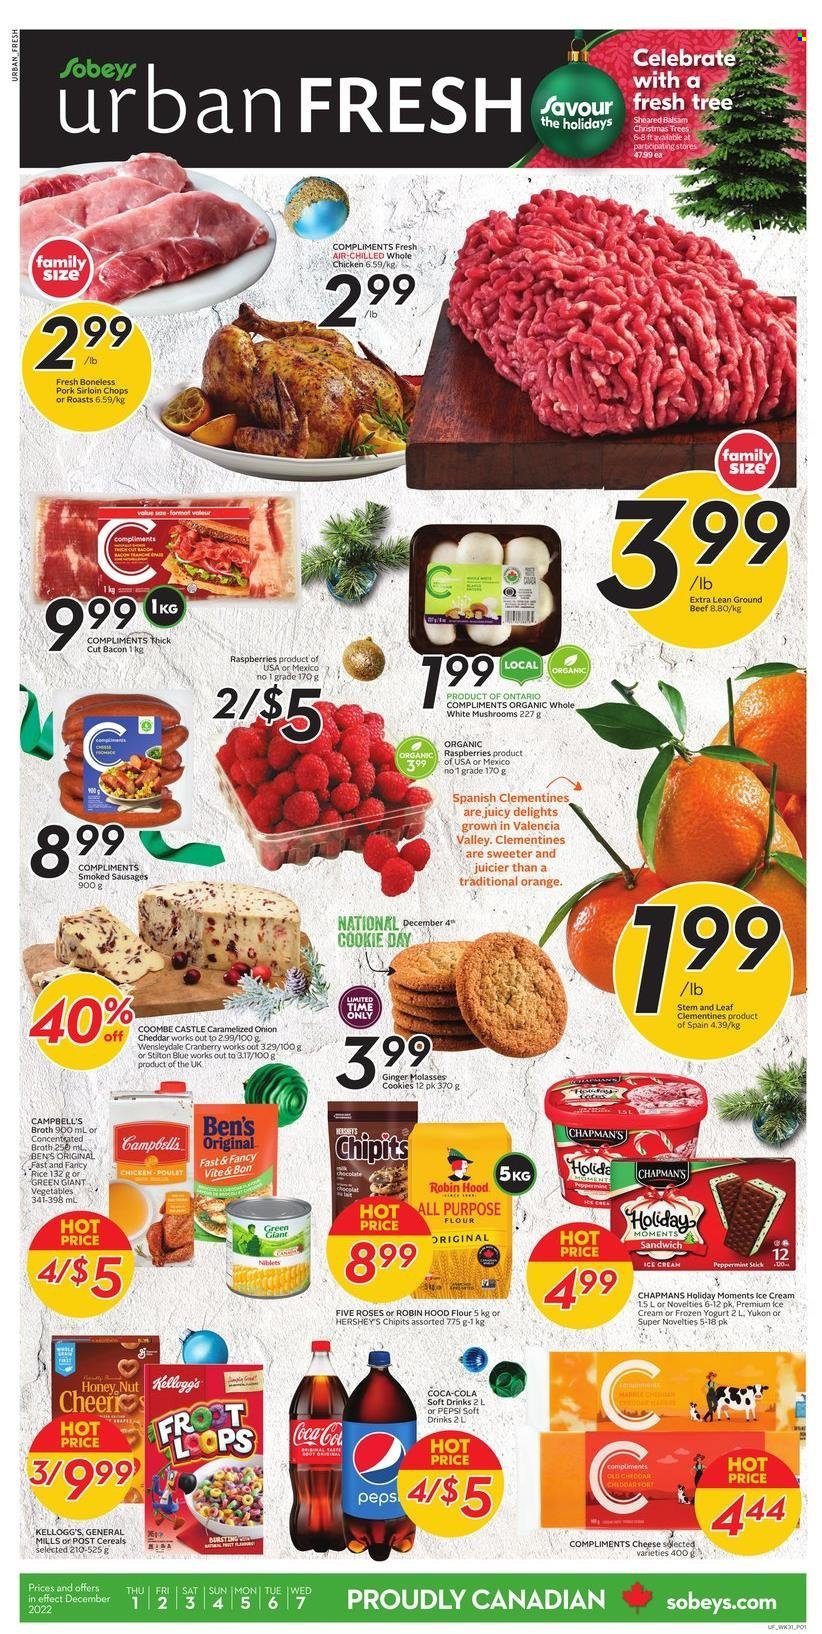 thumbnail - Sobeys Urban Fresh Flyer - December 01, 2022 - December 07, 2022 - Sales products - mushrooms, ginger, onion, clementines, oranges, Campbell's, sandwich, bacon, sausage, Stilton, Wensleydale, cheddar, cheese, yoghurt, ice cream, Hershey's, cookies, Kellogg's, all purpose flour, flour, broth, cereals, rice, molasses, Coca-Cola, Pepsi, soft drink, Castle, whole chicken, chicken, beef meat, ground beef, pork loin, Moments. Page 1.